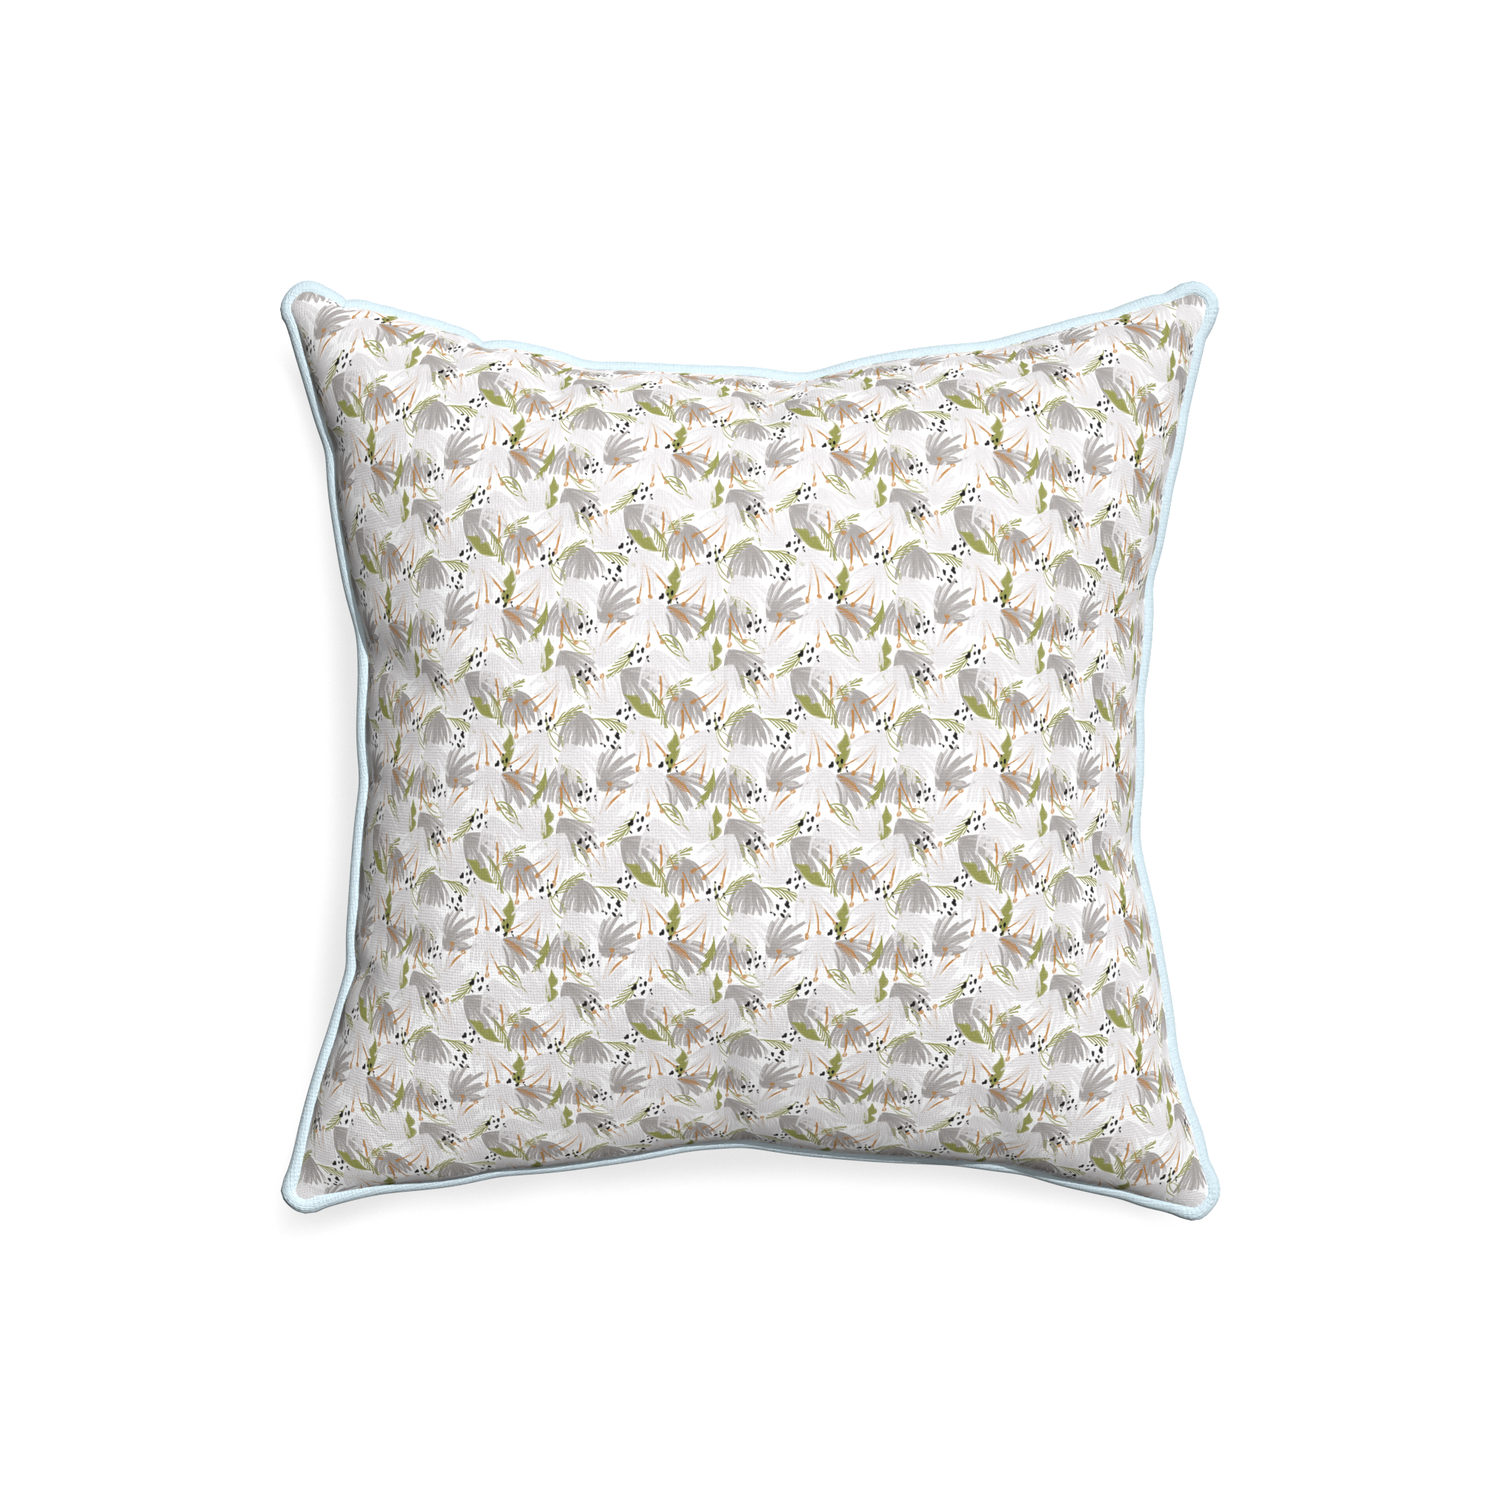 20-square eden grey custom pillow with powder piping on white background